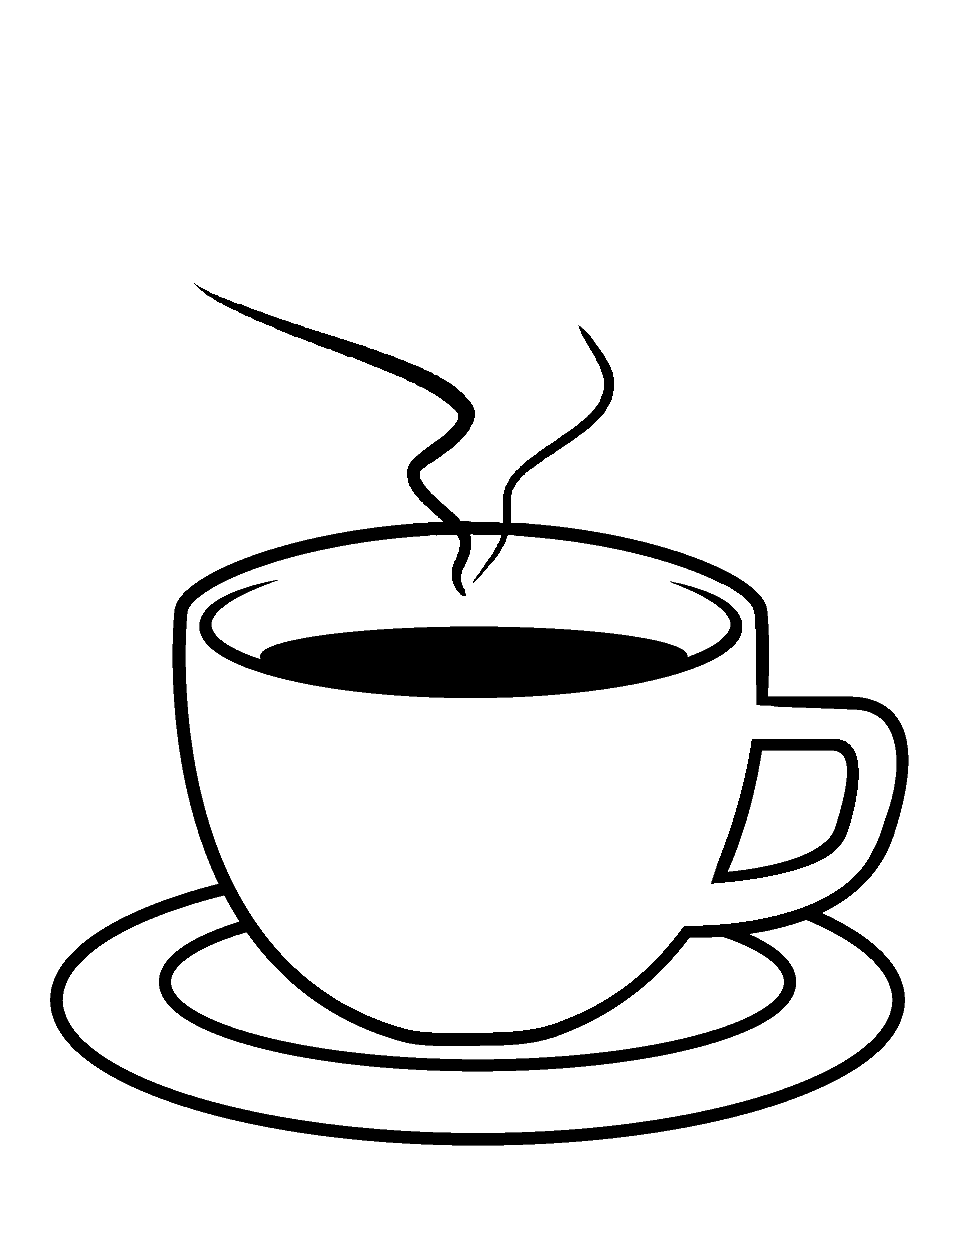 Teacup Steam Coloring Page - A teacup with steam rising.